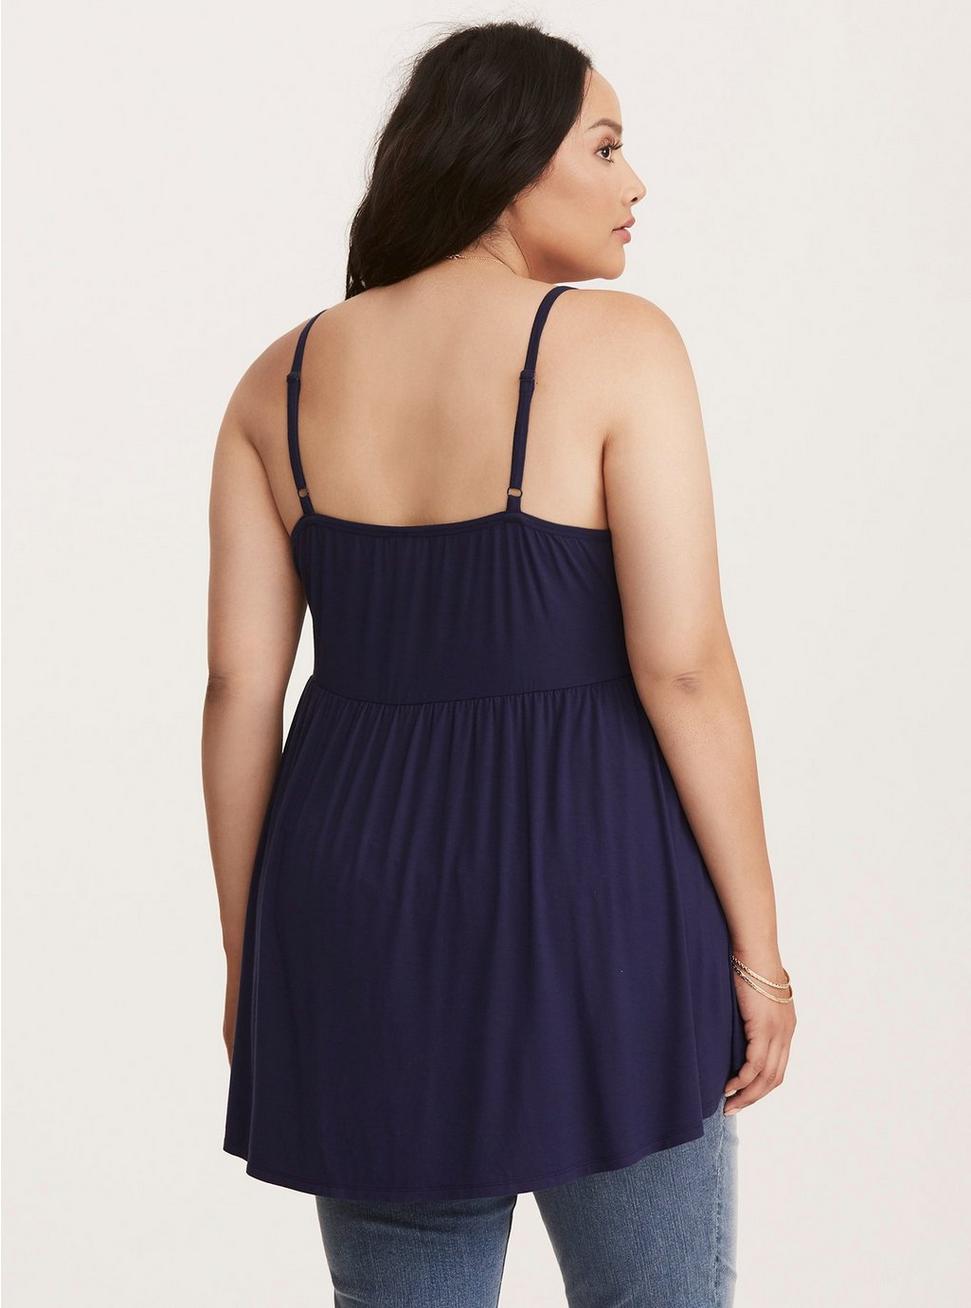 Plus Size - Embroidered Button Front Babydoll Tank Top - Torrid